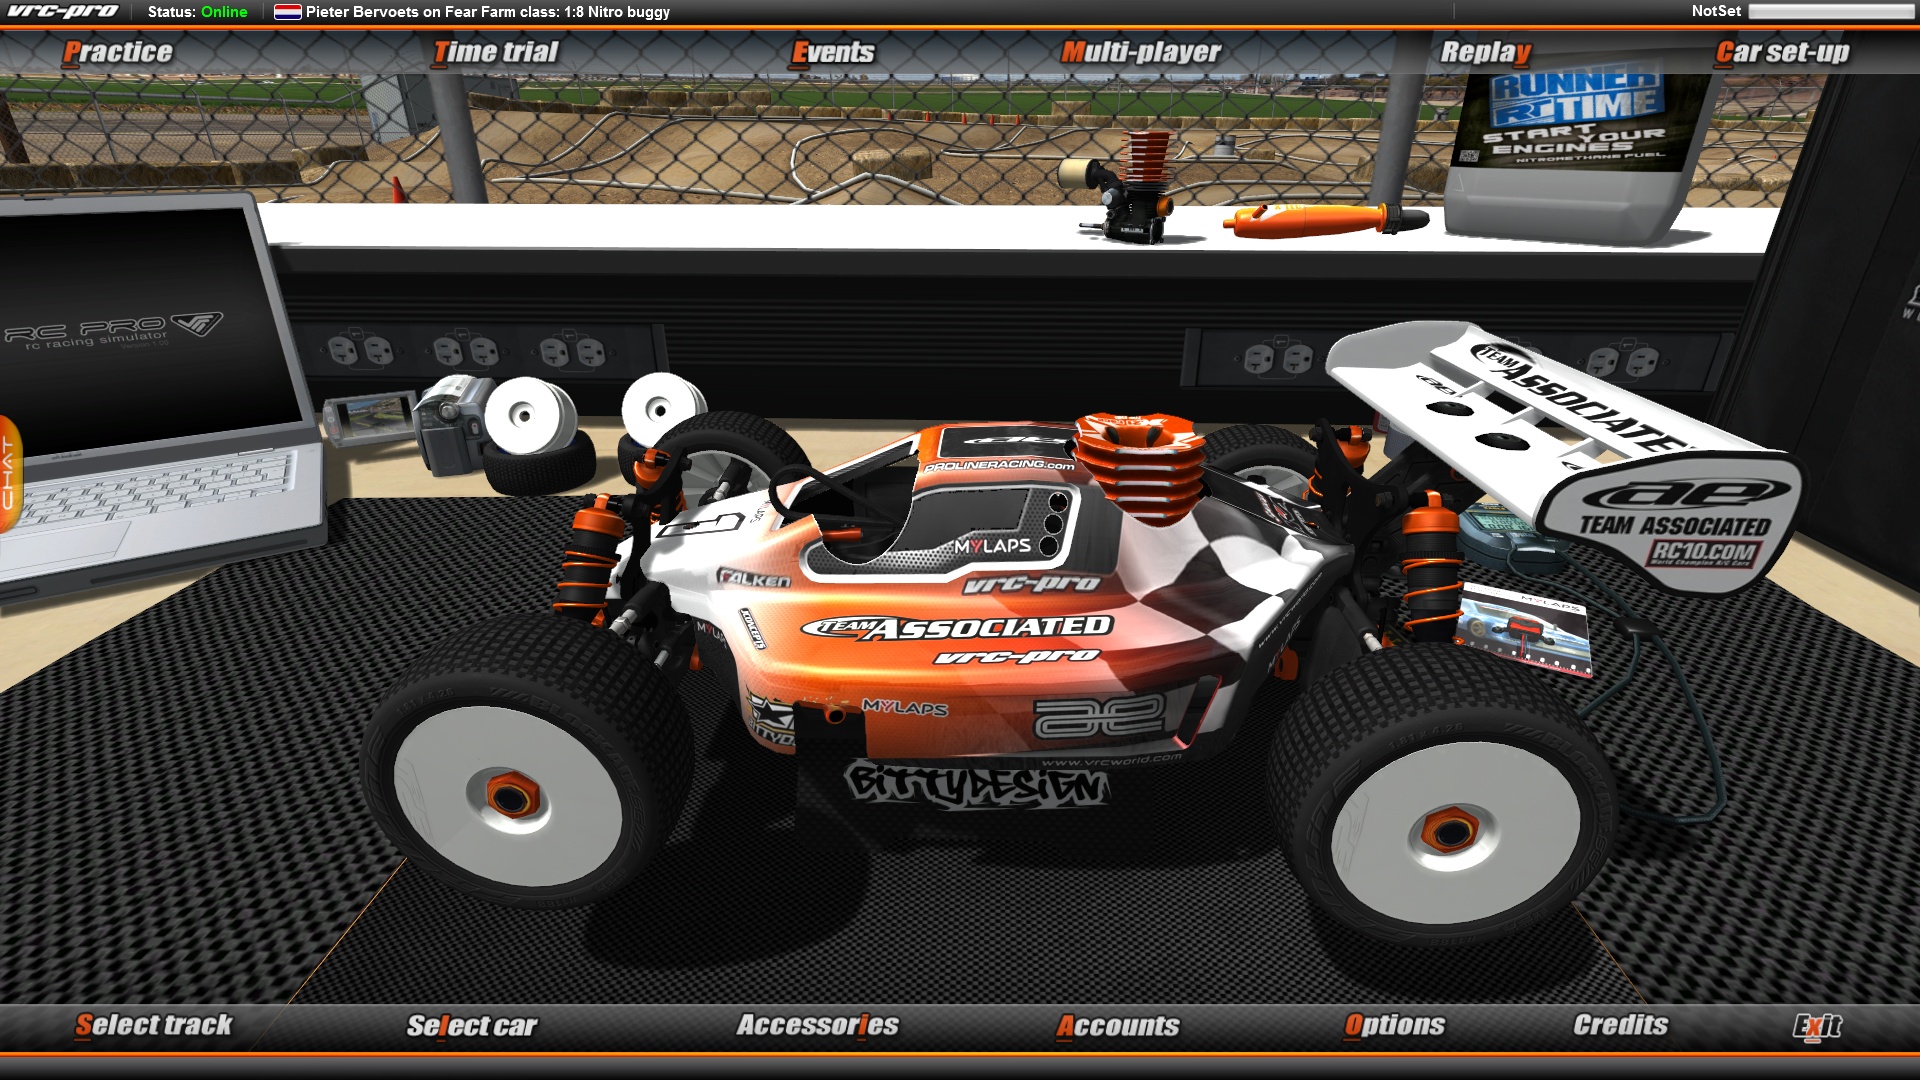 VRC PRO Branded cars and components Deluxe Featured Screenshot #1